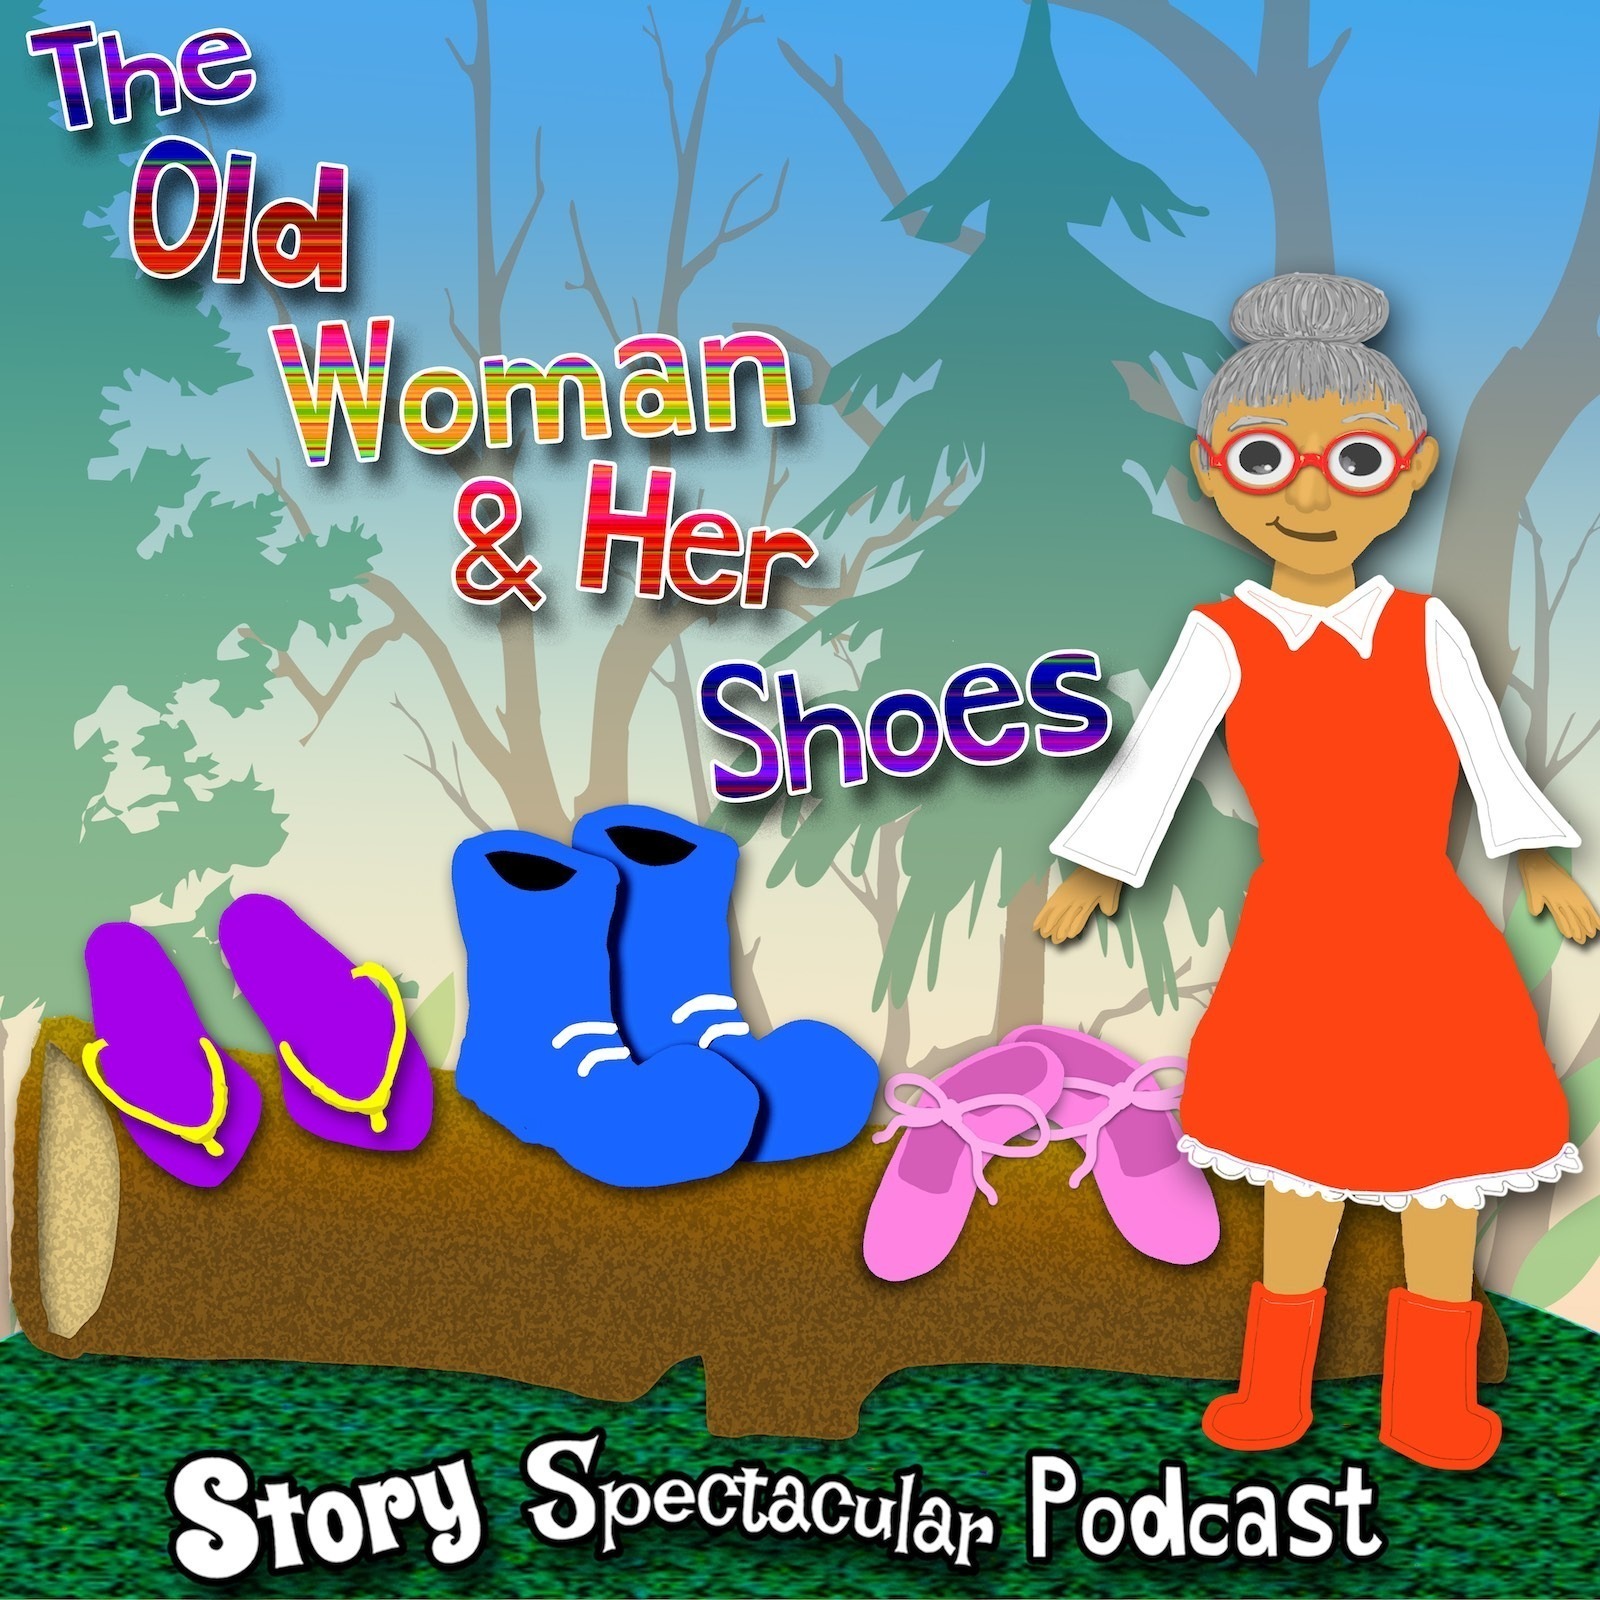 The Old Woman and her Shoes (Bedtime)